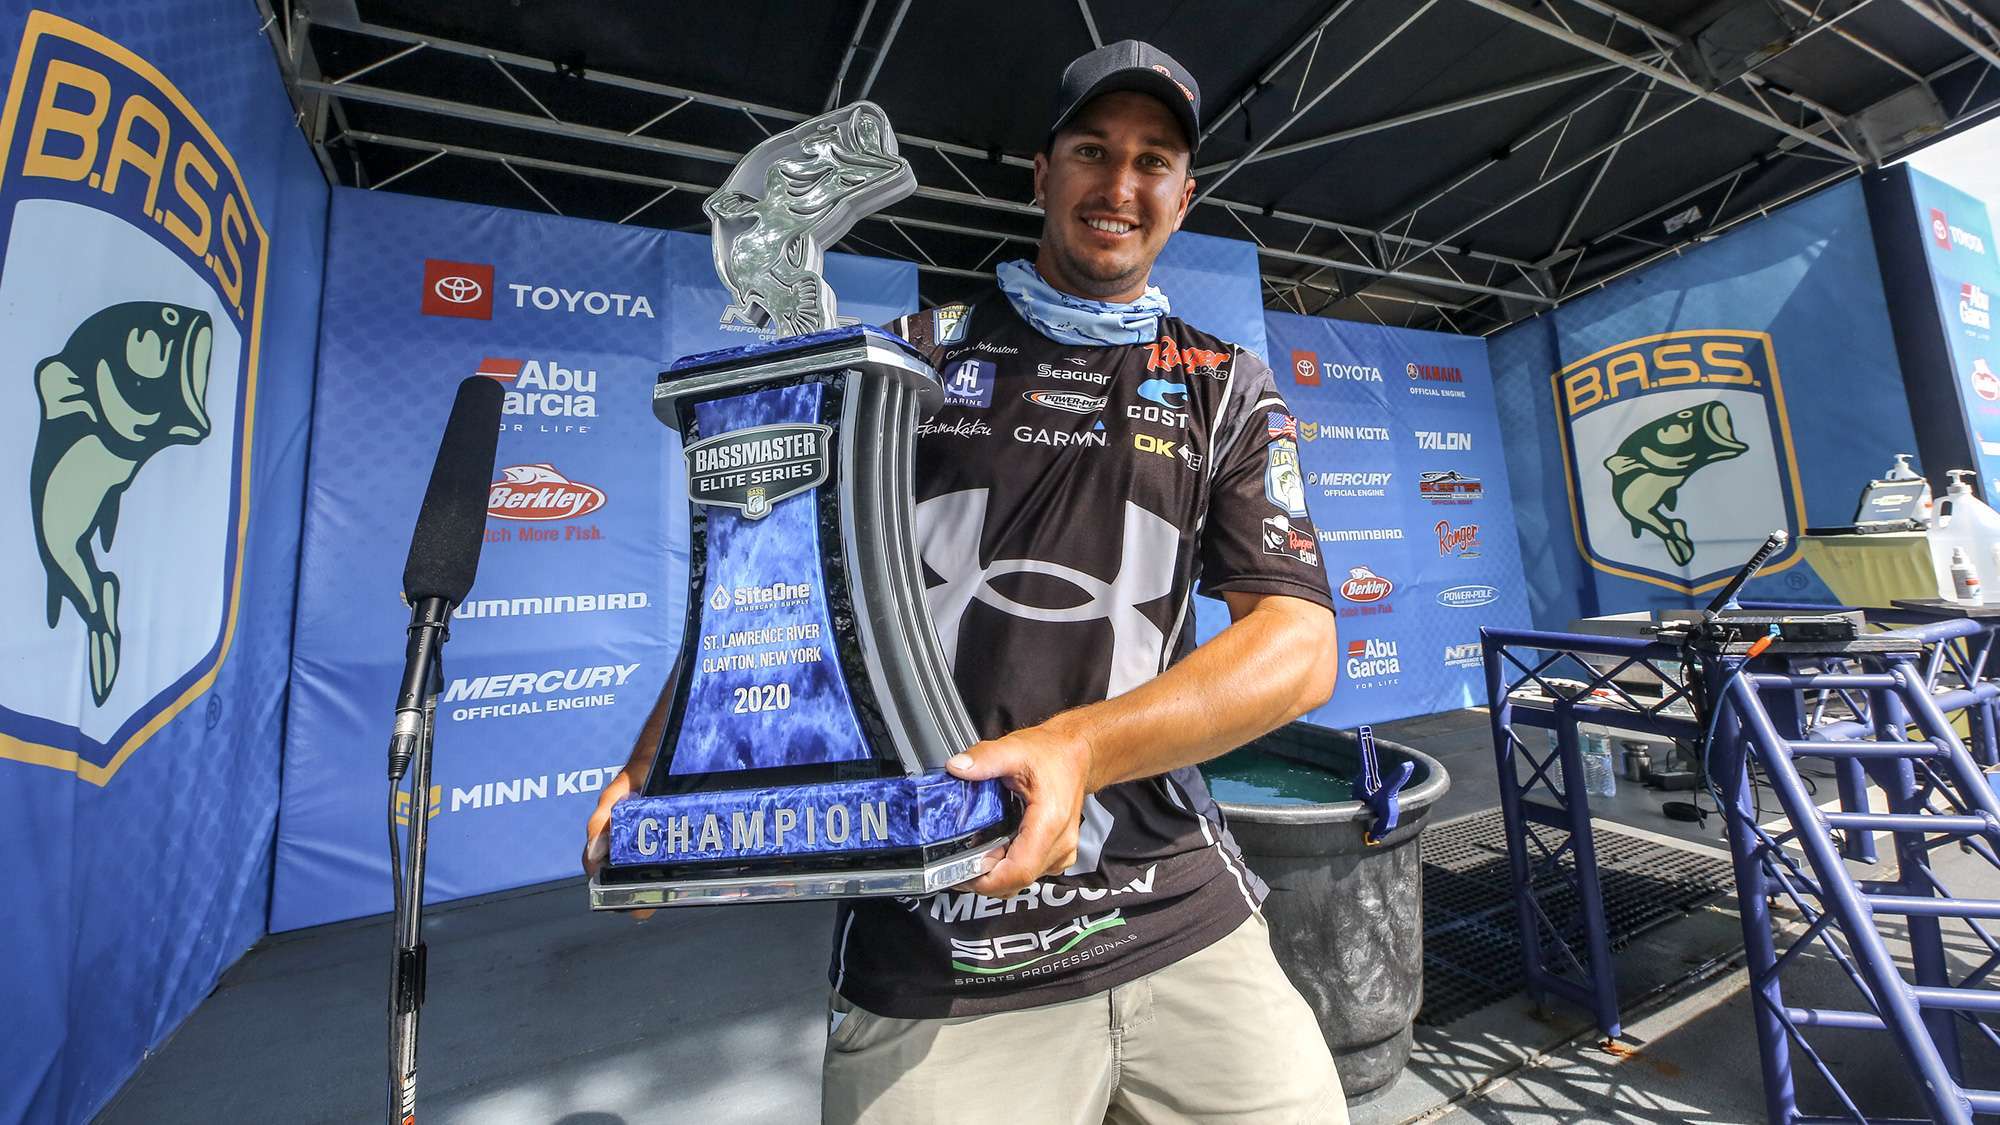 Bringing an impressive resume to the big stage of Bassmaster Elite Series competition, Chris Johnston owns the distinction of being the first Canadian angler to win a blue trophy. An accomplished smallmouth angler who won in 2020 on the St. Lawrence River, Johnston has also proven his green fish skills. 